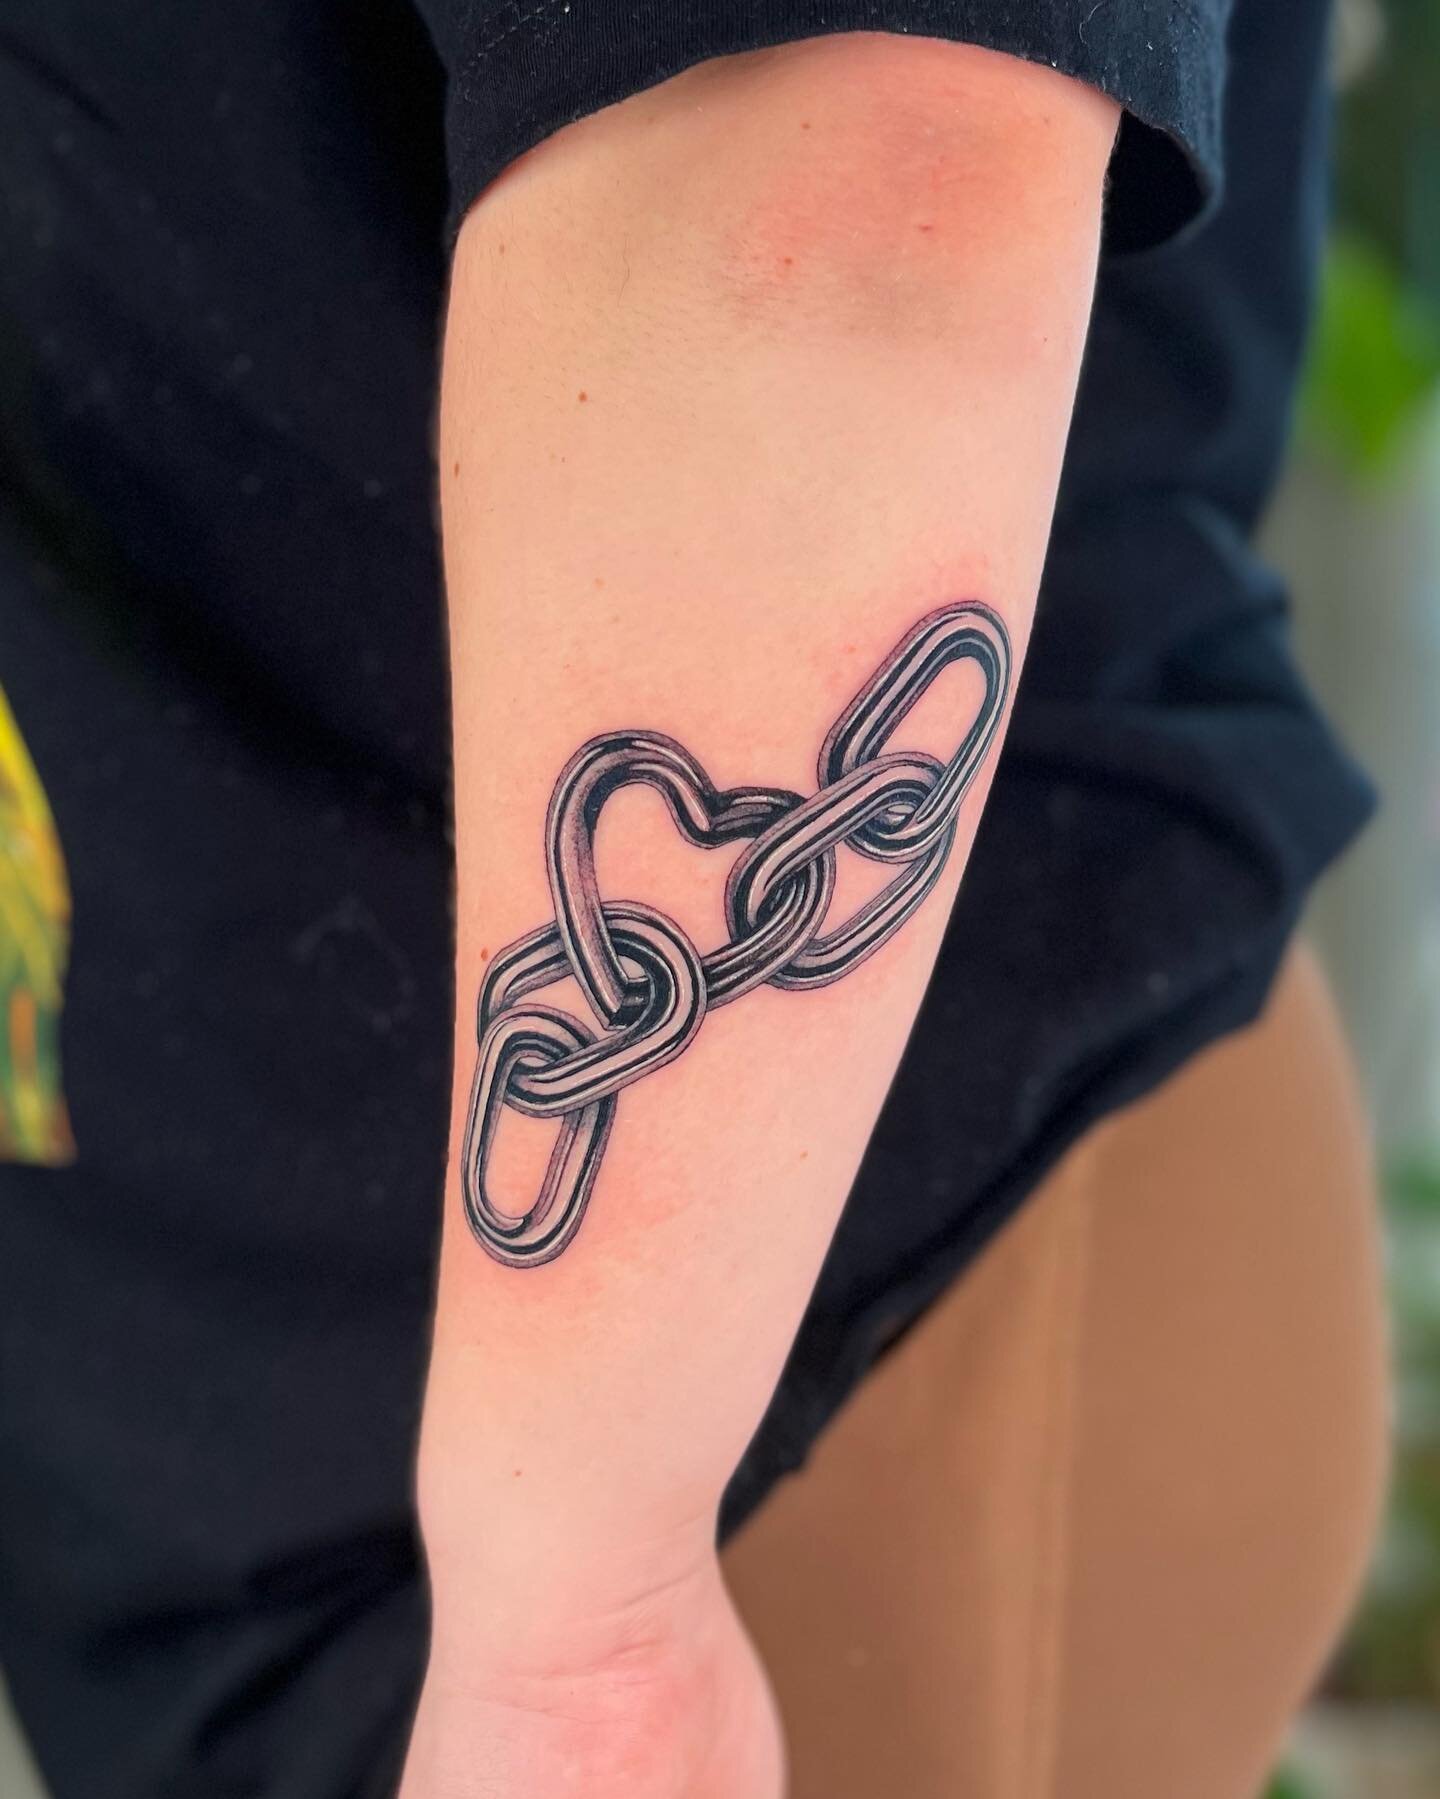 heart chain from my flash
had so much fun making this chain link for my lovely client, nina. 
&bull;
#RayCorsonTattoo 
#DallasTattooArtist 
#TexasTattoos
#FemaleTattooer 
#ChainTattoo 
#HeartChain